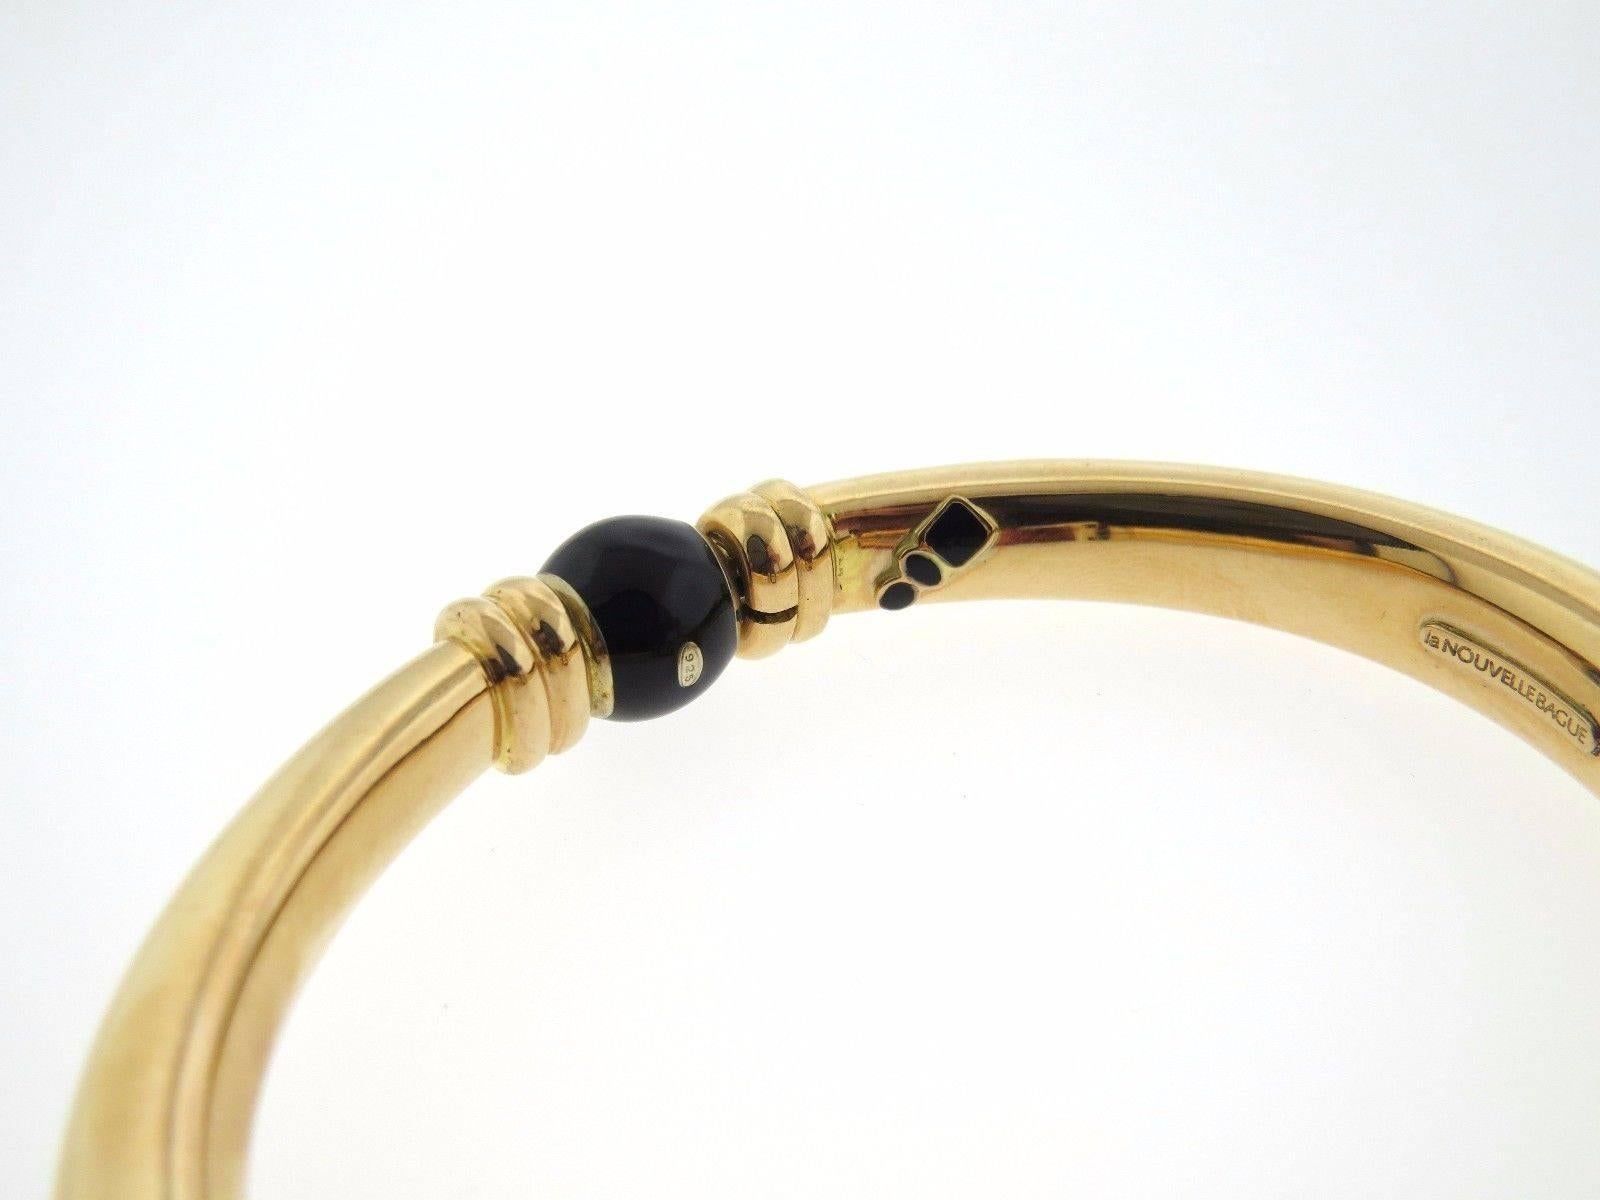 An 18k gold and sterling silver bracelet set with onyx and approximately 0.28ctw of H/VS diamonds.  The bangle will fit up to a 7.5